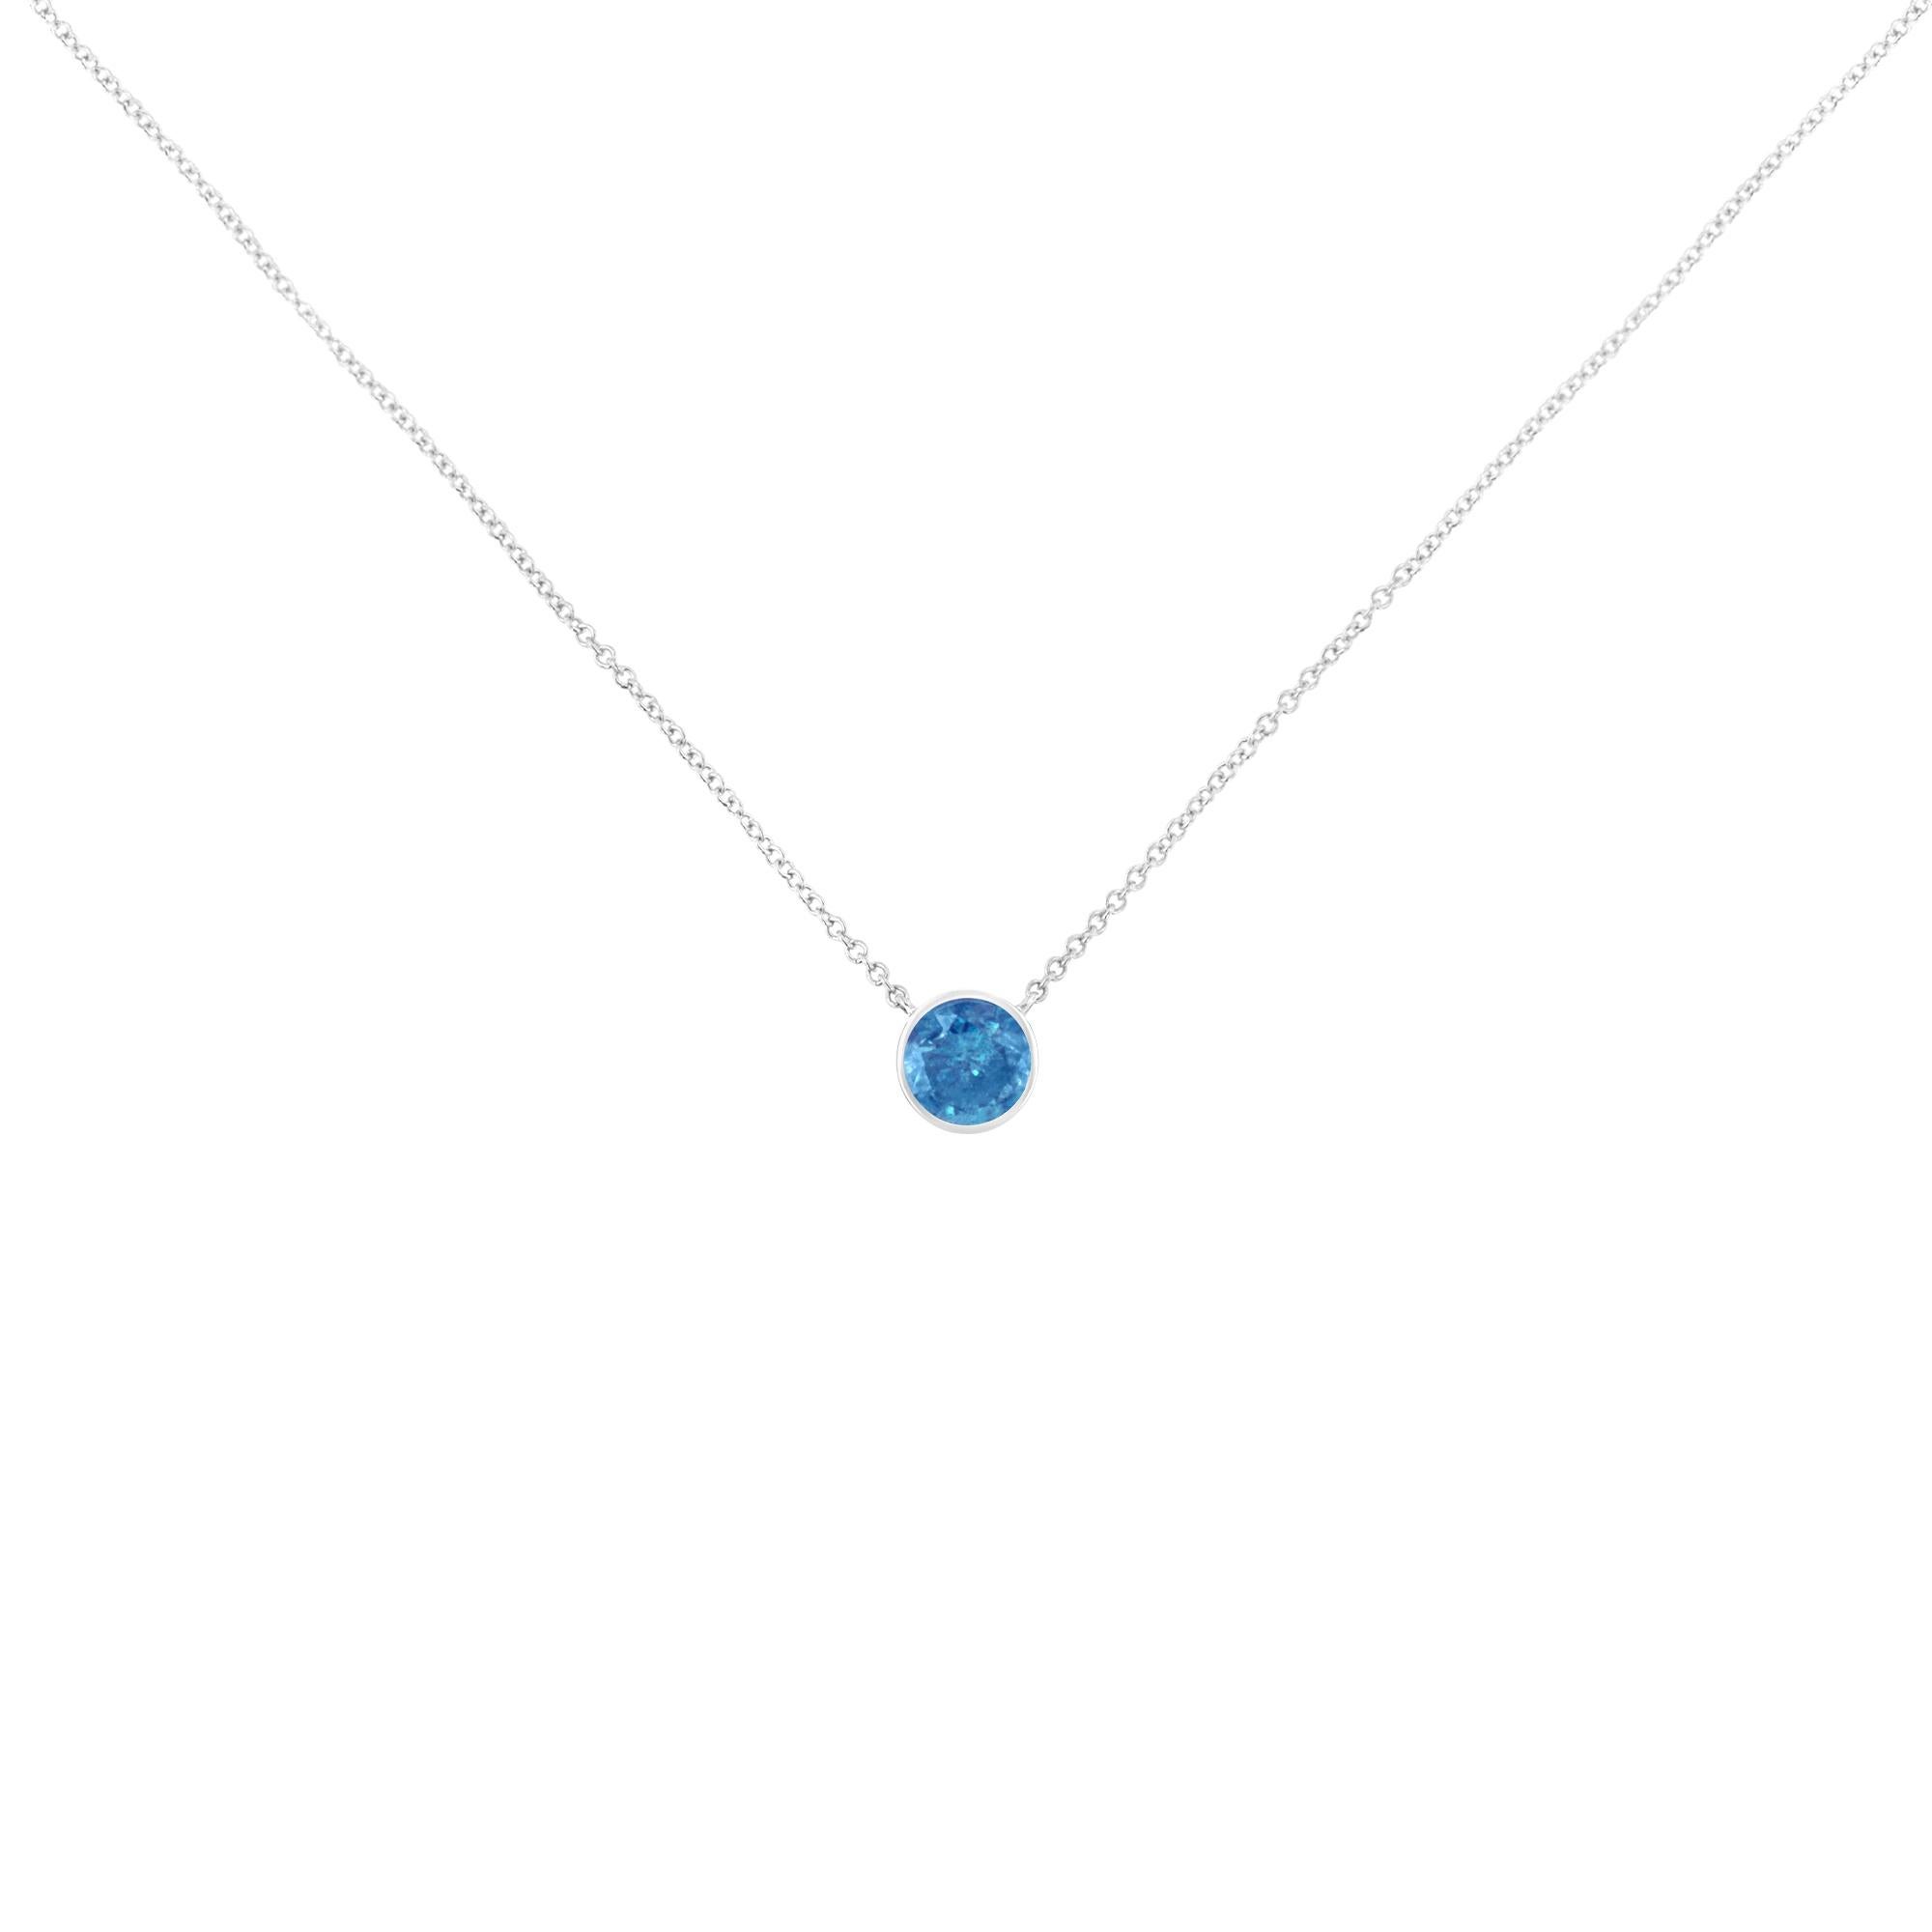 Some things shouldn't be reinvented, which is why we created the Solitaire Blue Diamond Necklace. This is the perfect way to highlight every big occasion, transition, and personal achievement in your life. This Solitaire Diamond Necklace features a